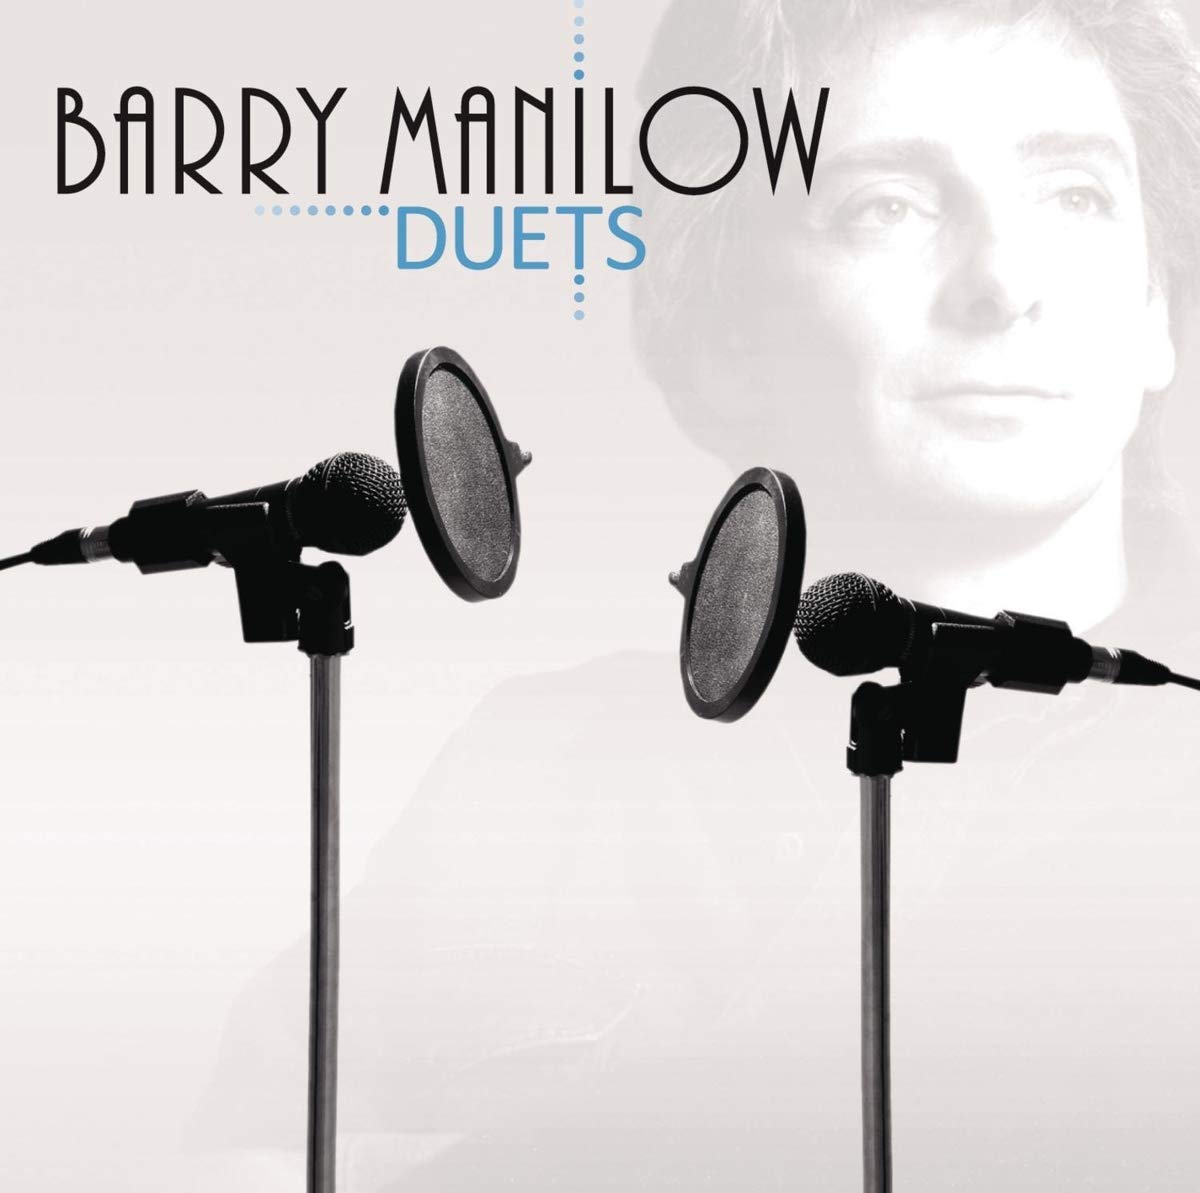 Barry Manilow- Duets - Darkside Records